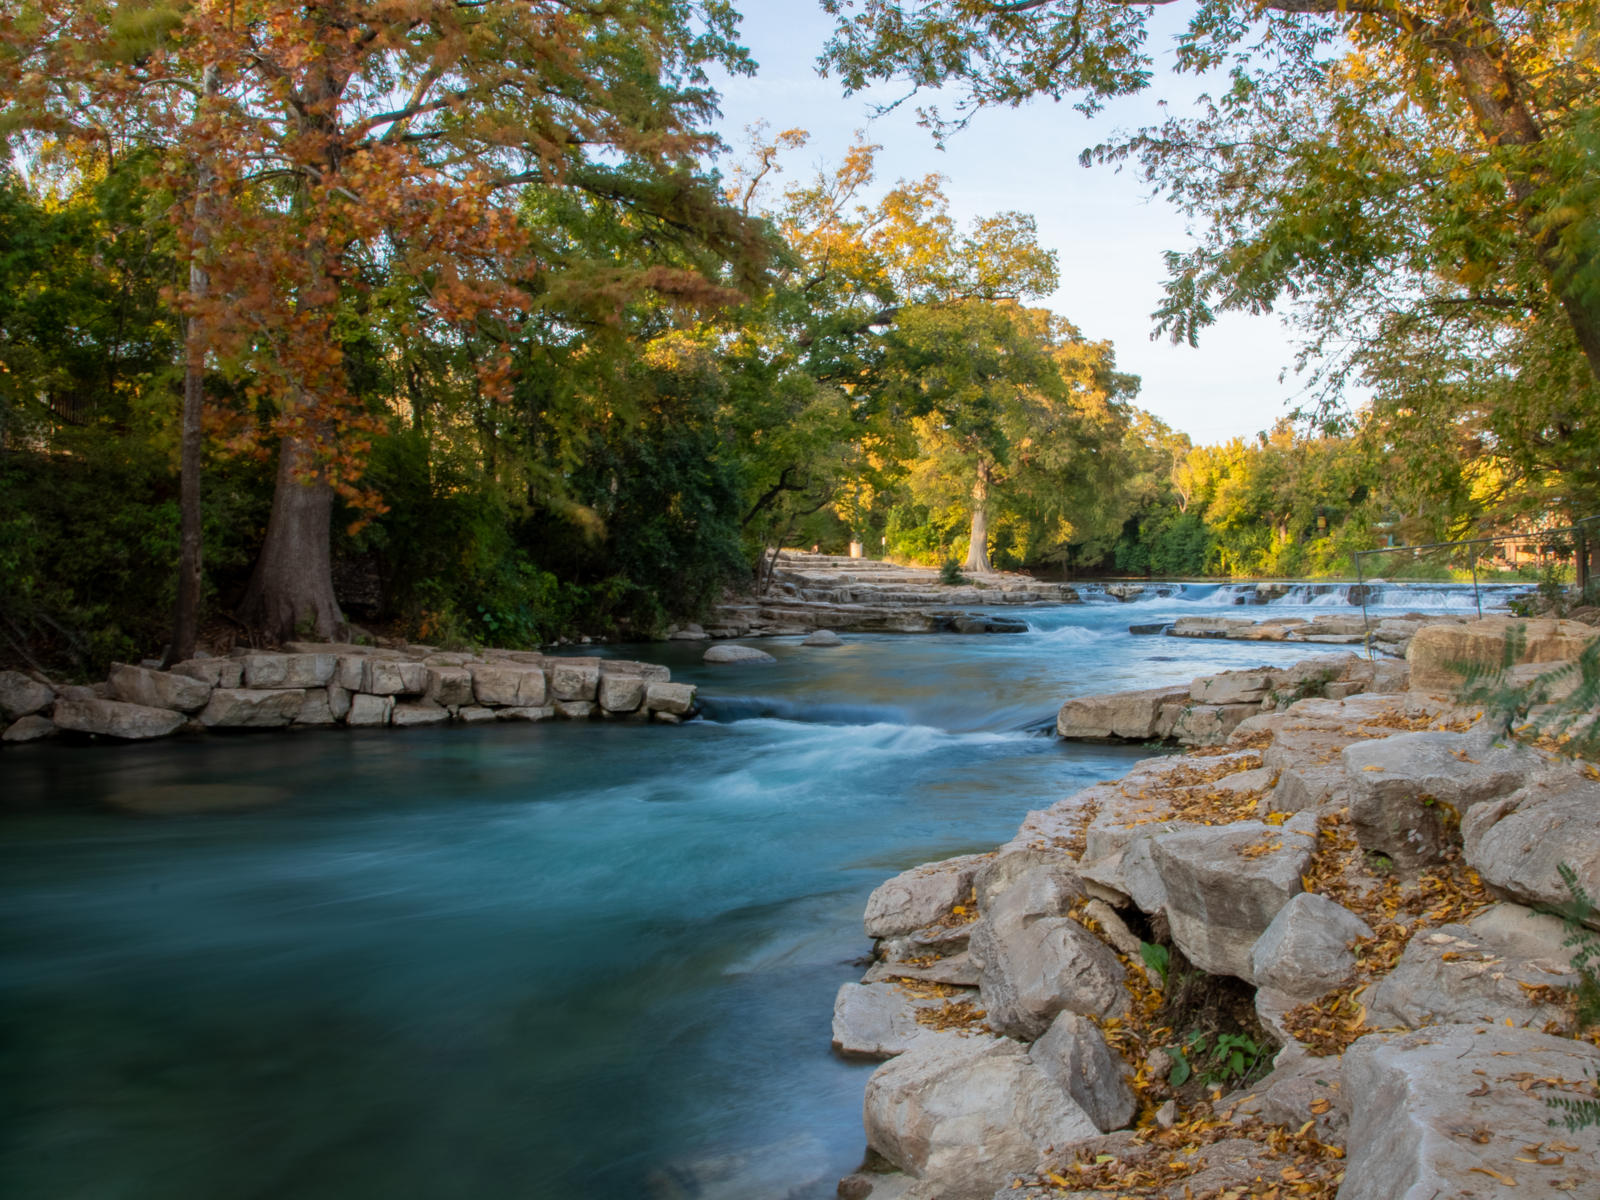 Autumn day by the San Marcos River, one of the best things to do in Texas, as pictured from the shore